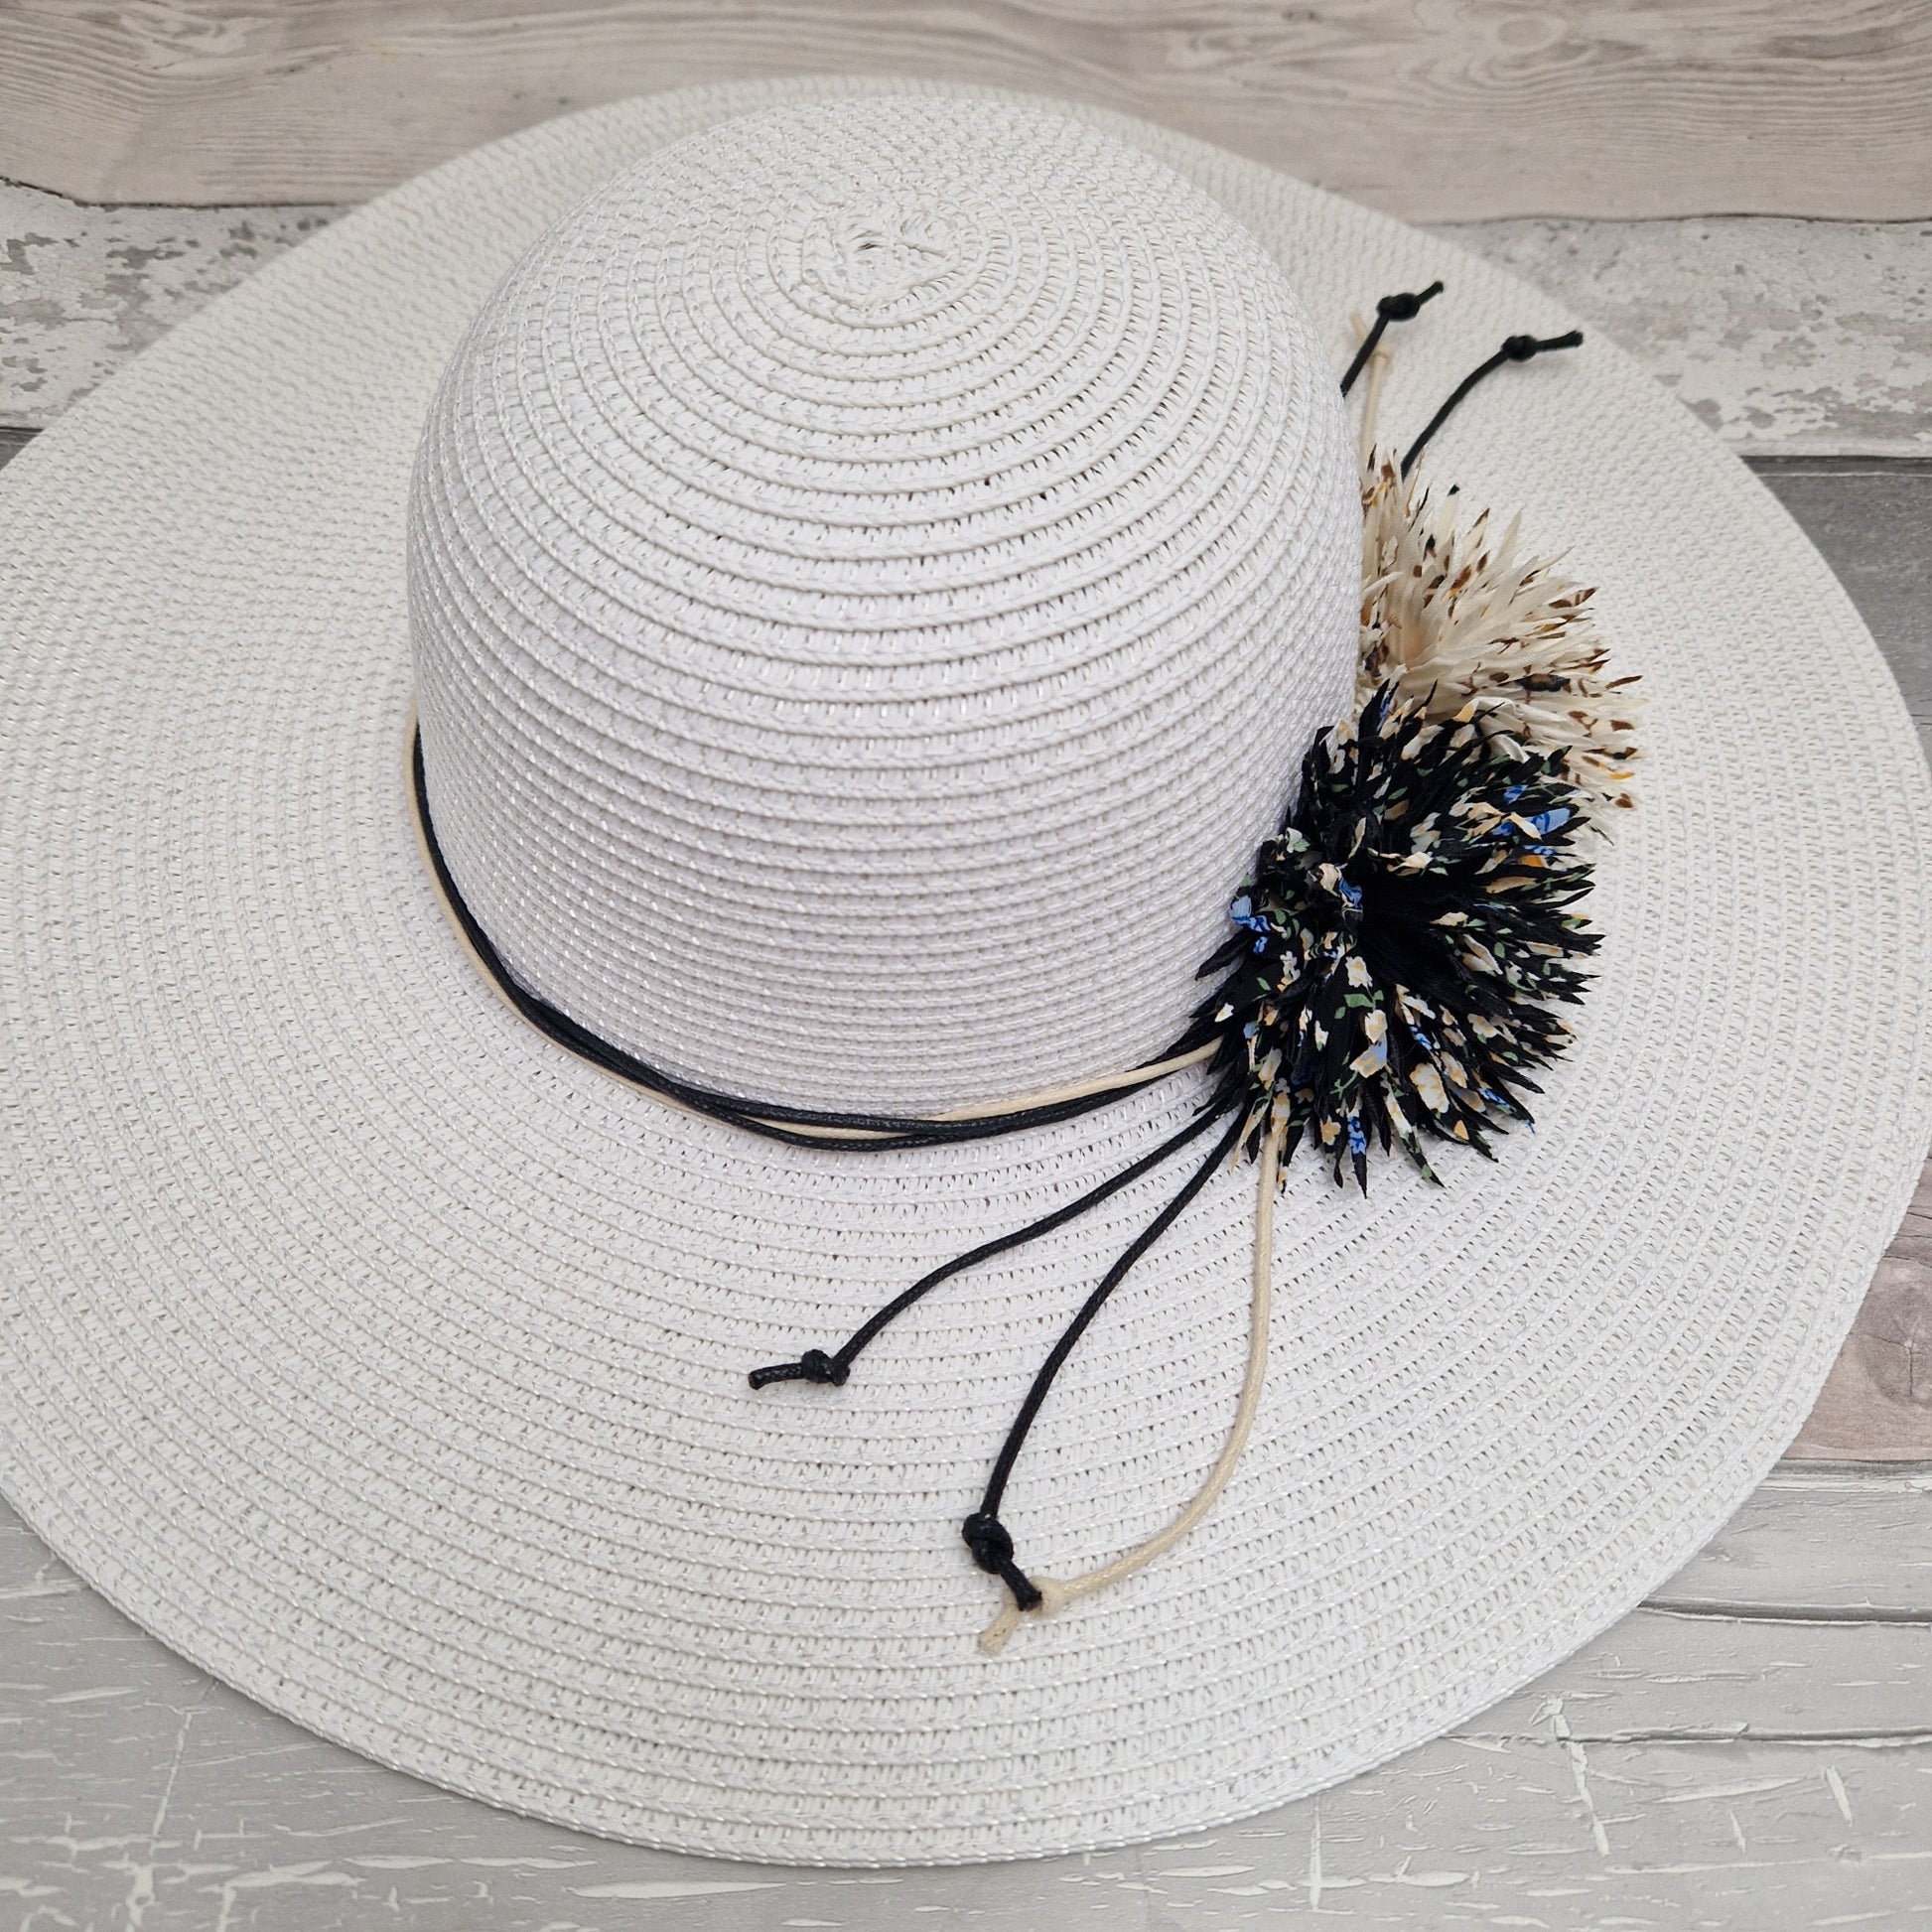 White wide brimmed hat decorated with 2 flowers in black and cream tones.